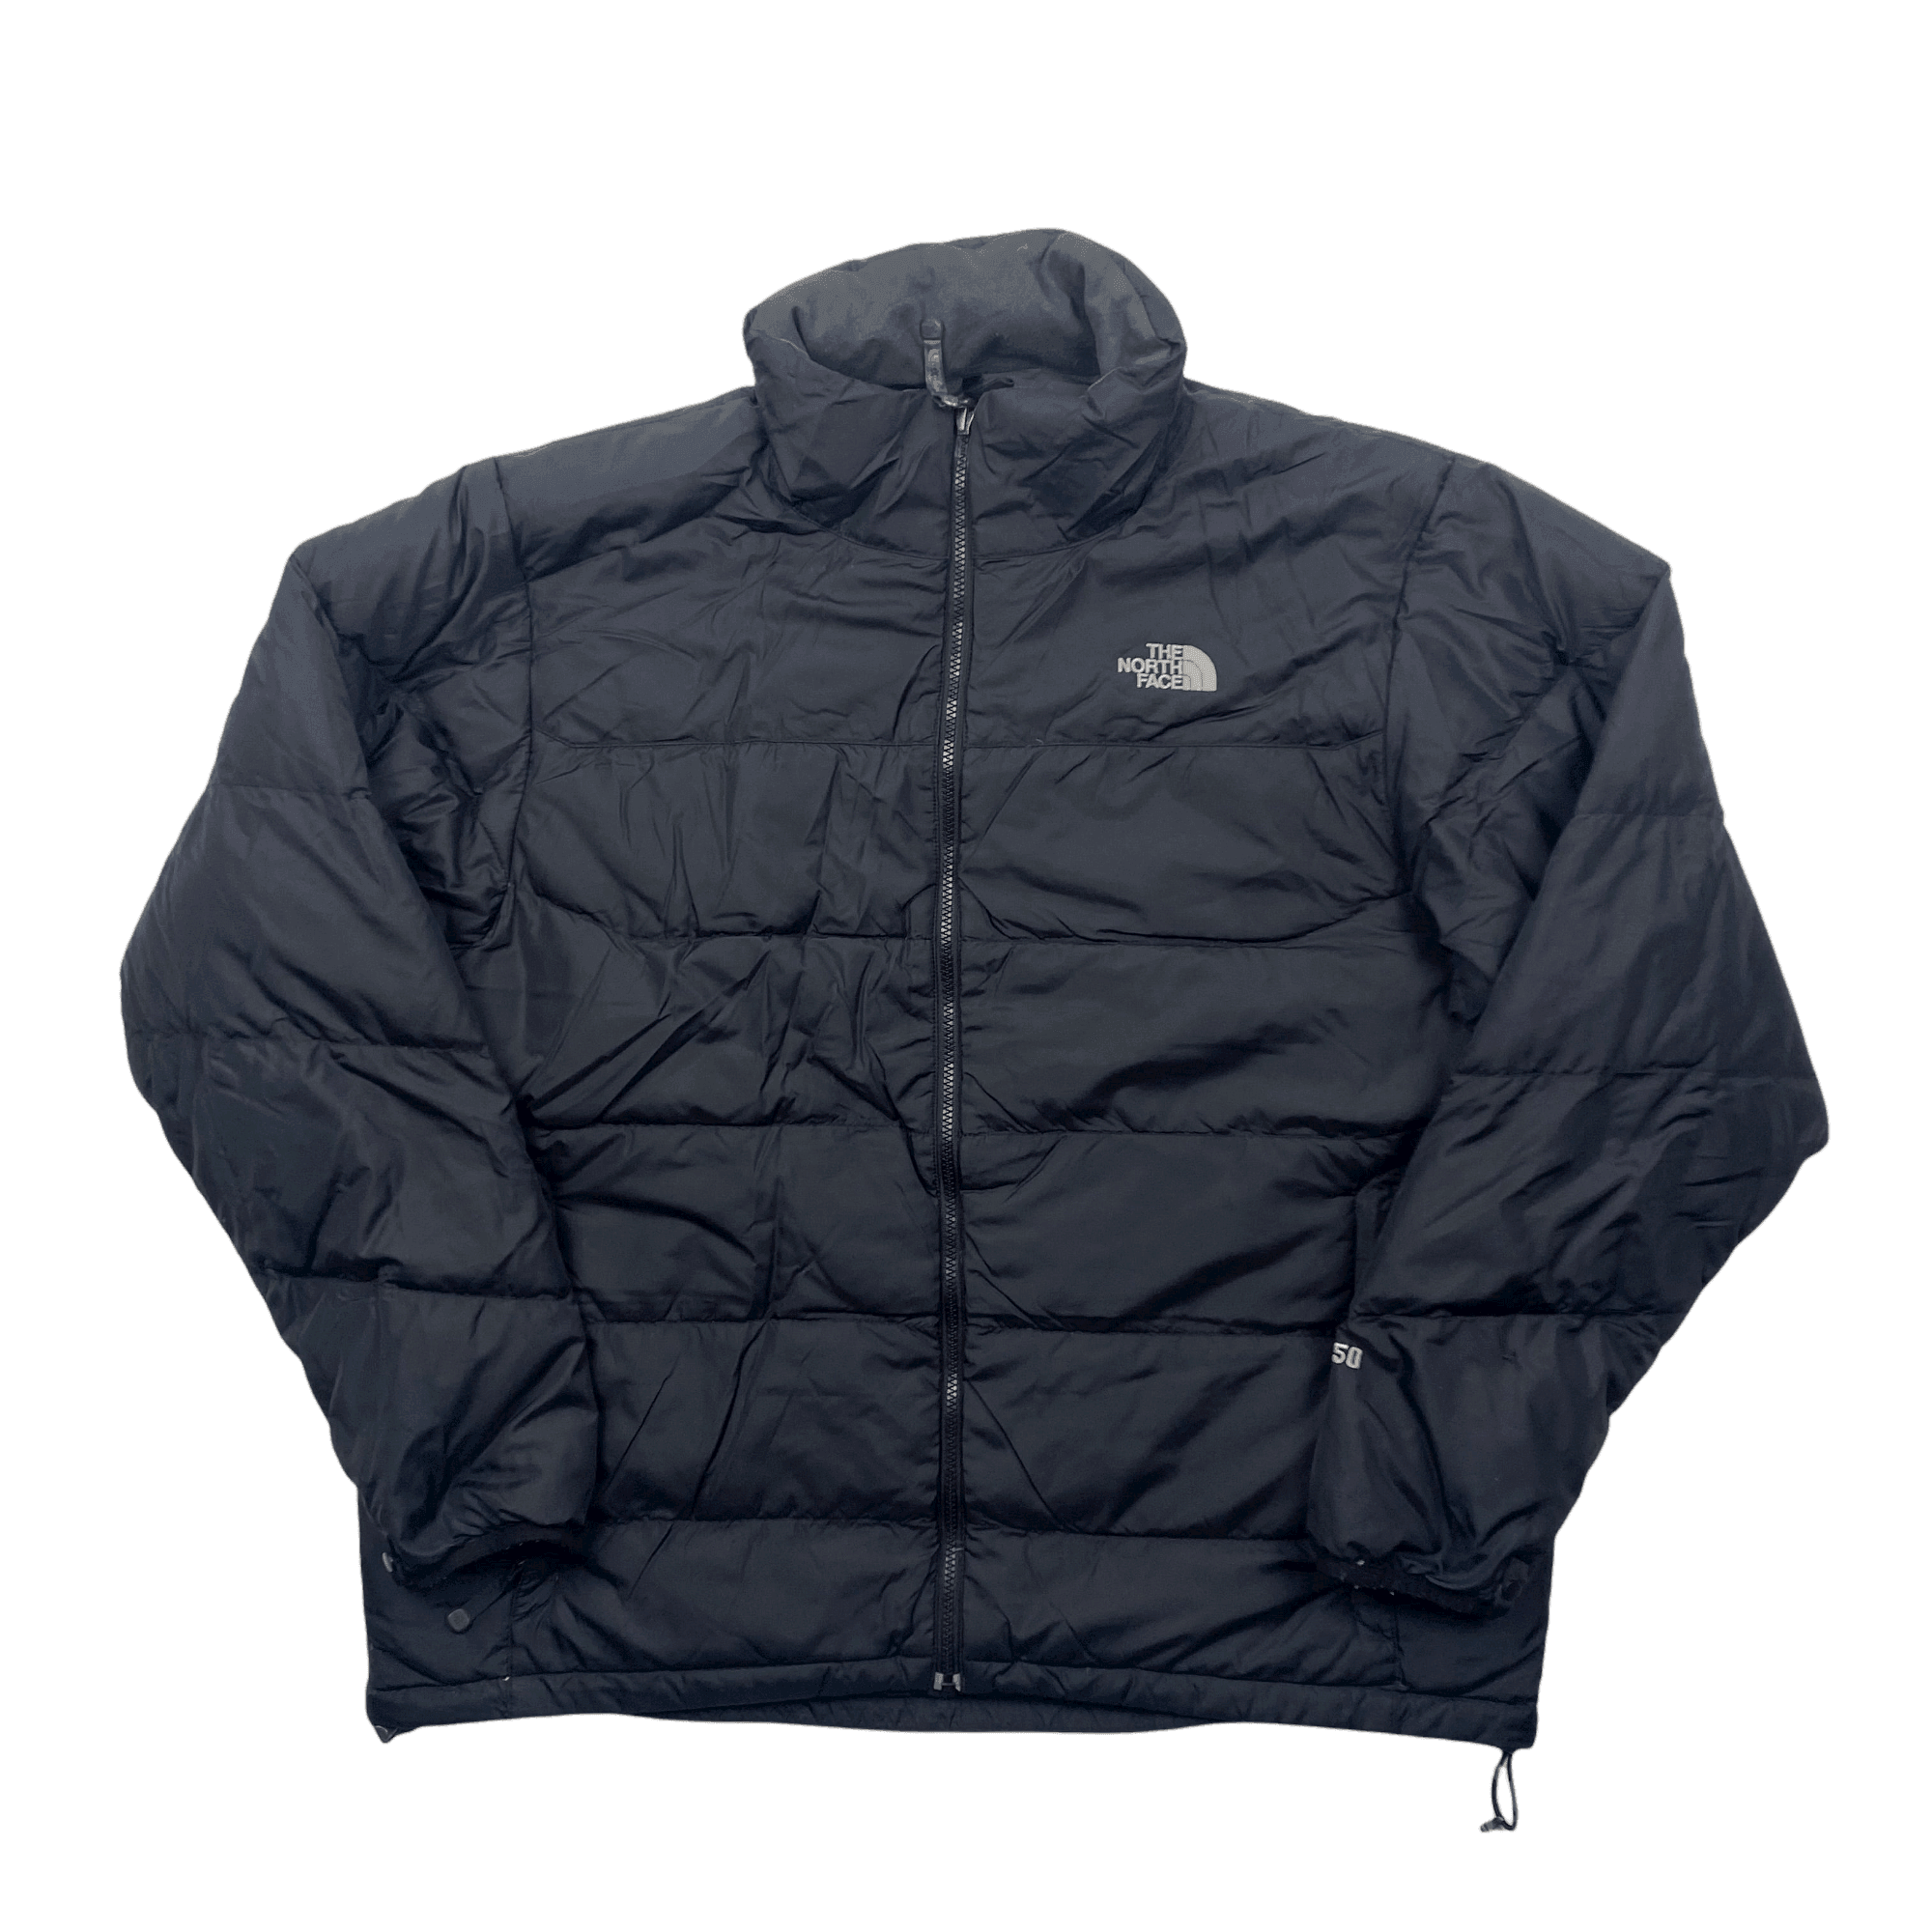 Vintage Black The North Face (TNF) Coat/ Jacket - Extra Large - The Streetwear Studio